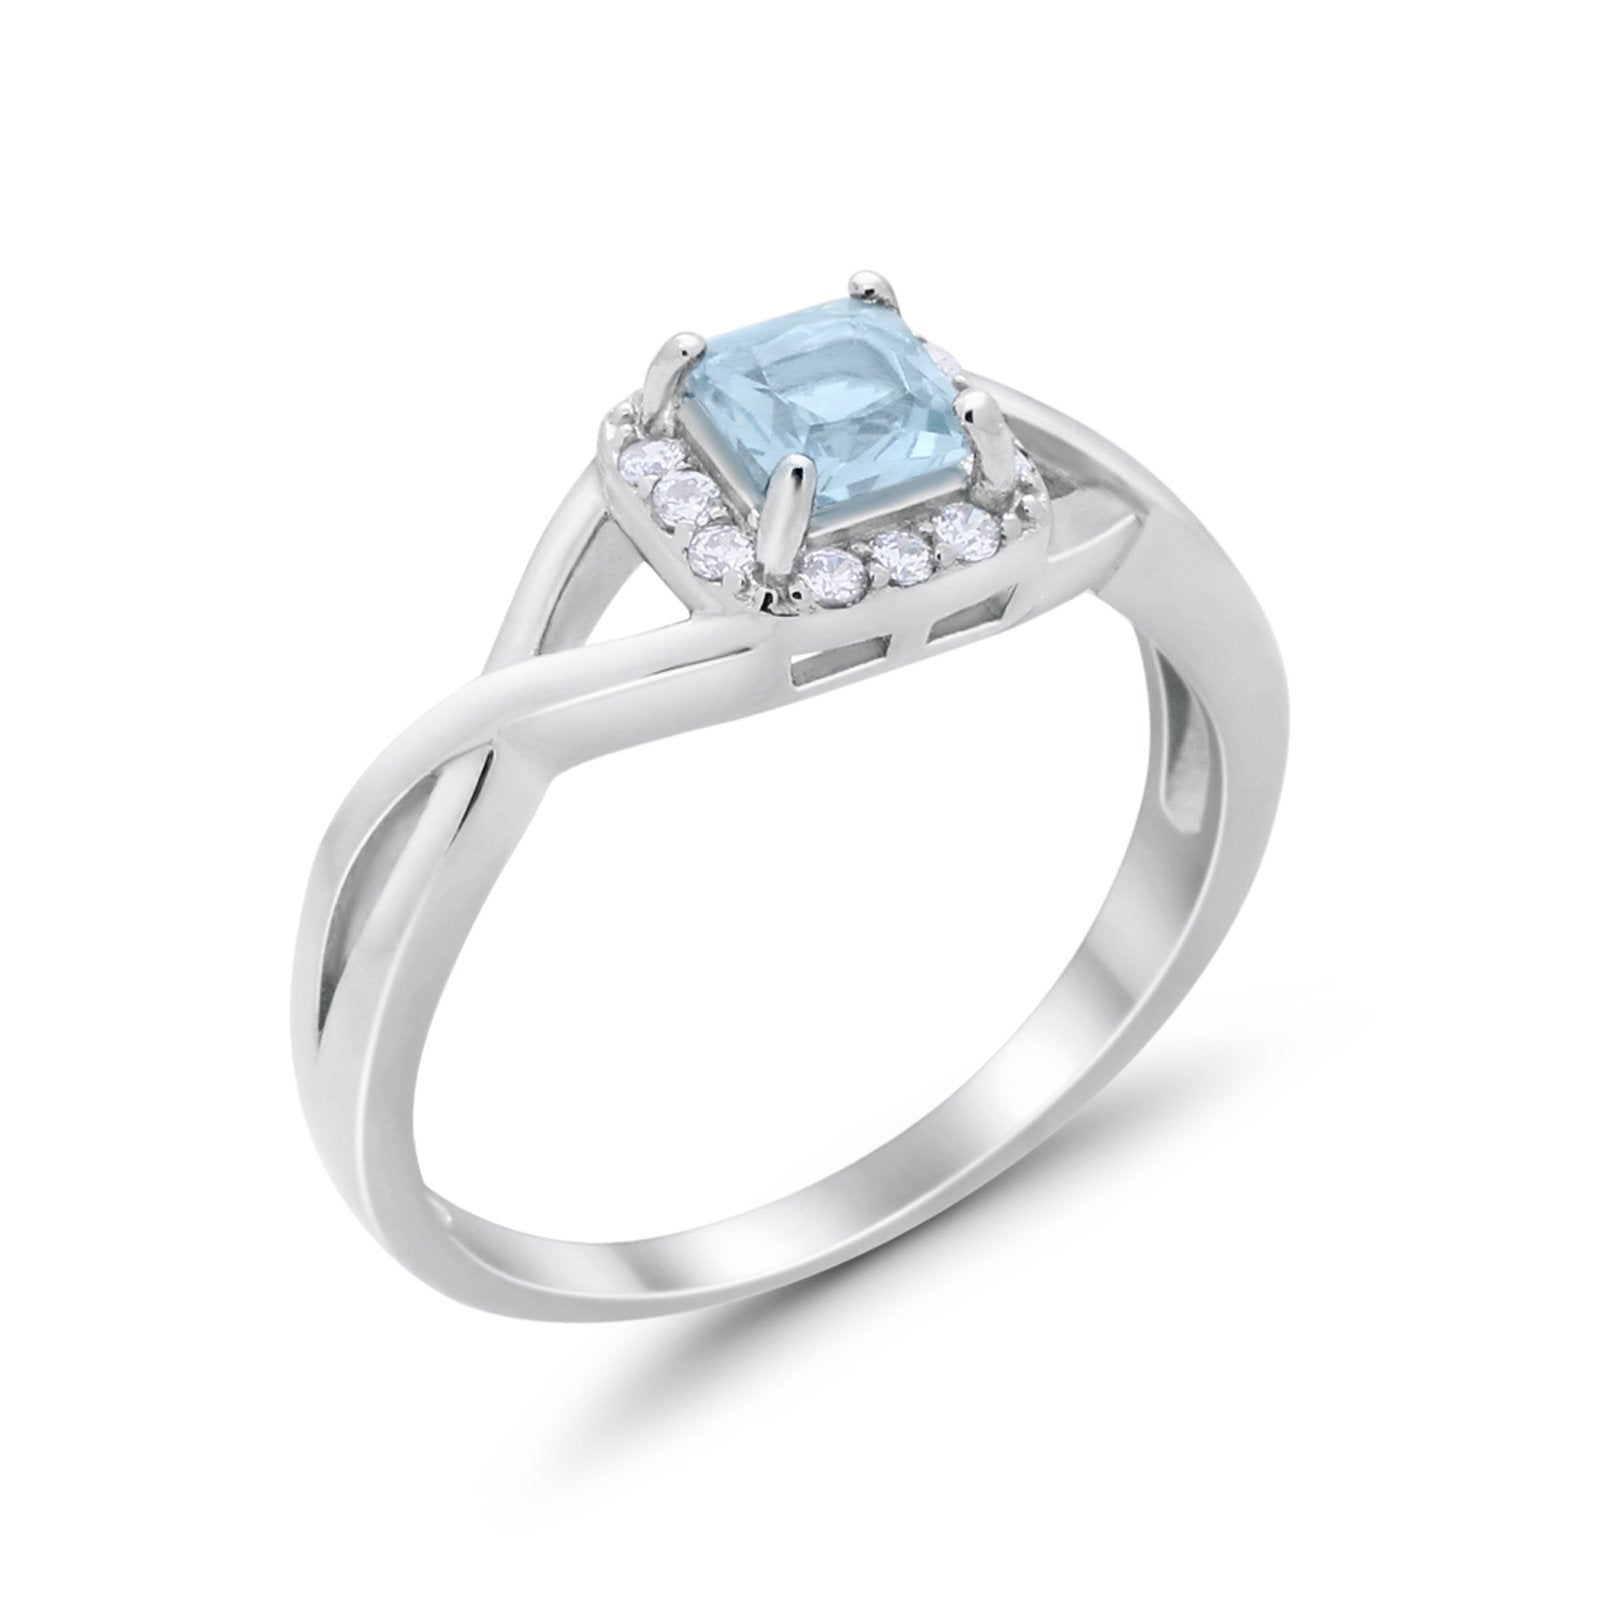 Solitaire Infinity Shank Ring Princess Cut Simulated Aquamarine CZ 925 Sterling Silver